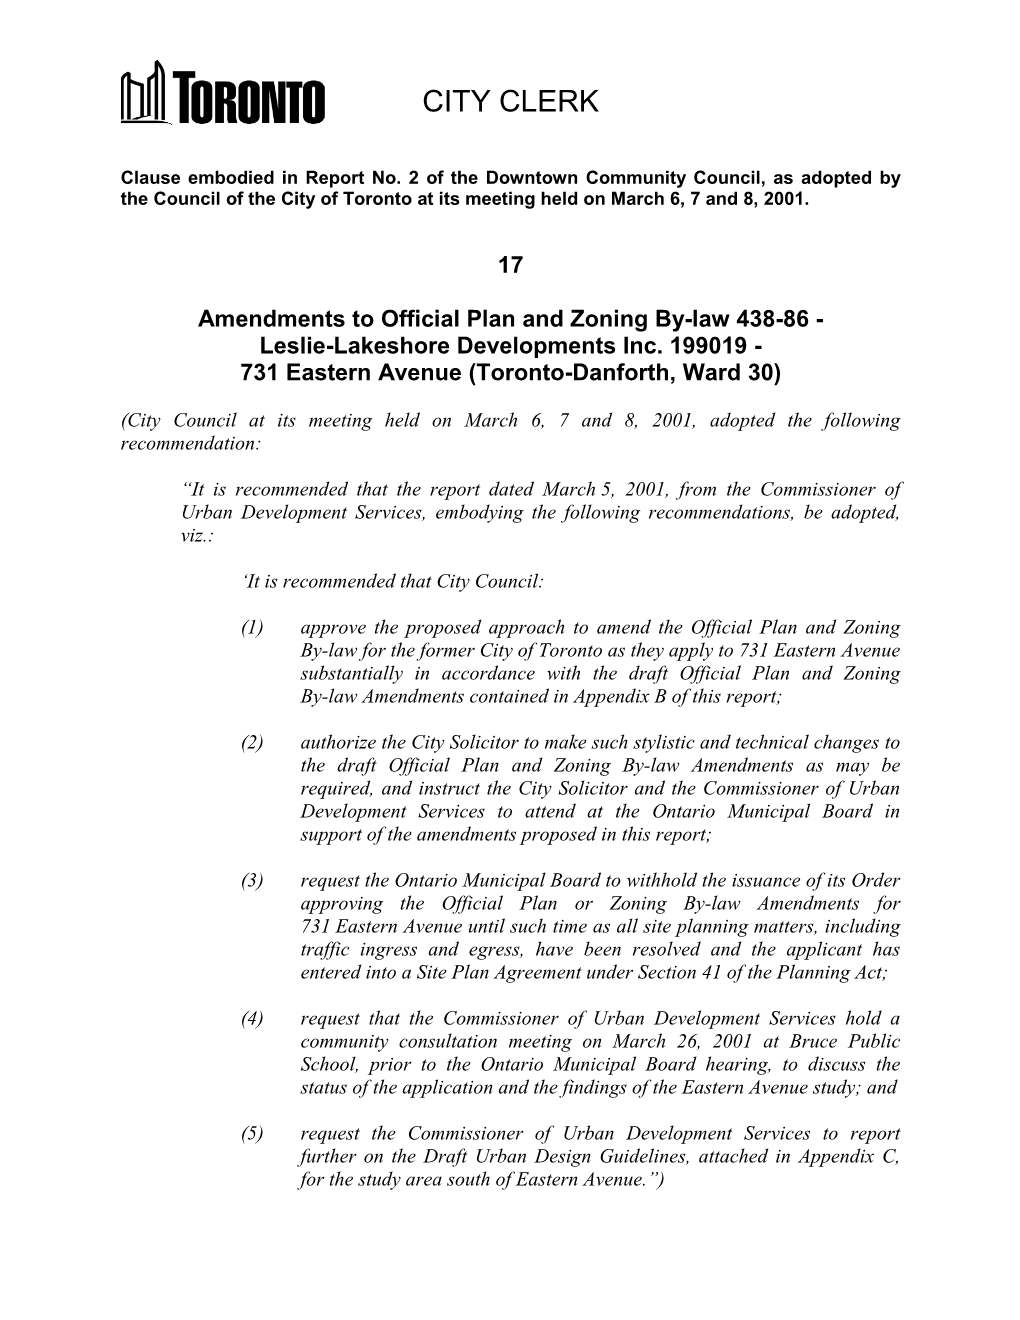 17 Amendments to Official Plan and Zoning By-Law 438-86